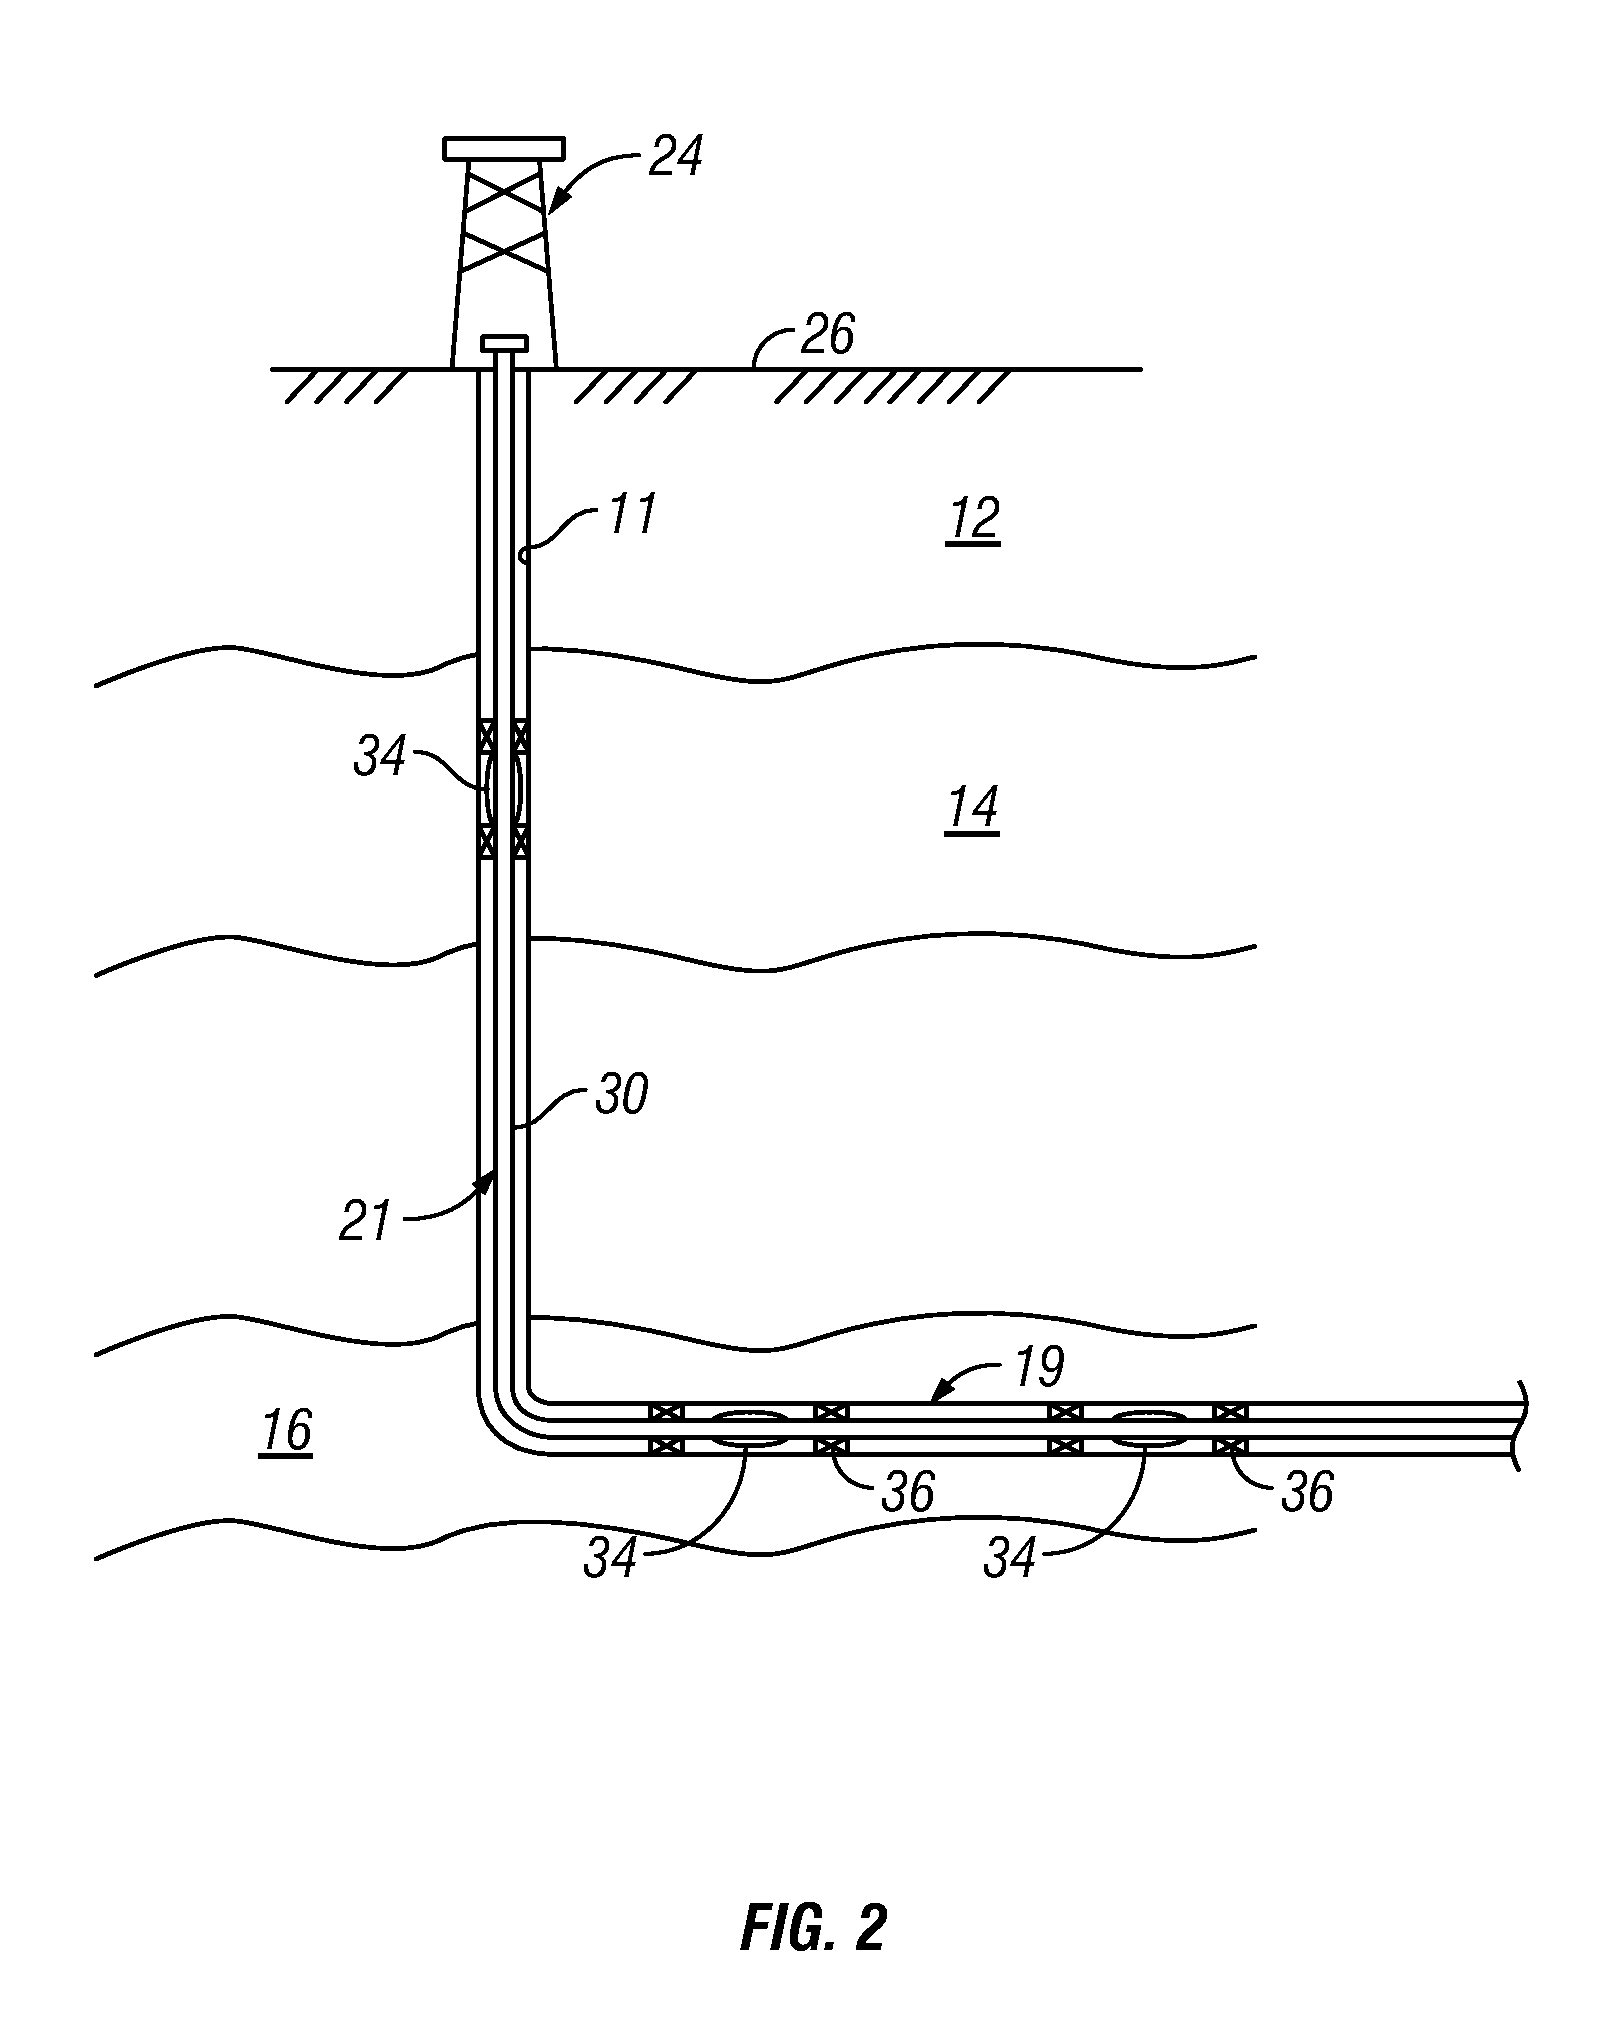 Water absorbing or dissolving materials used as an in-flow control device and method of use